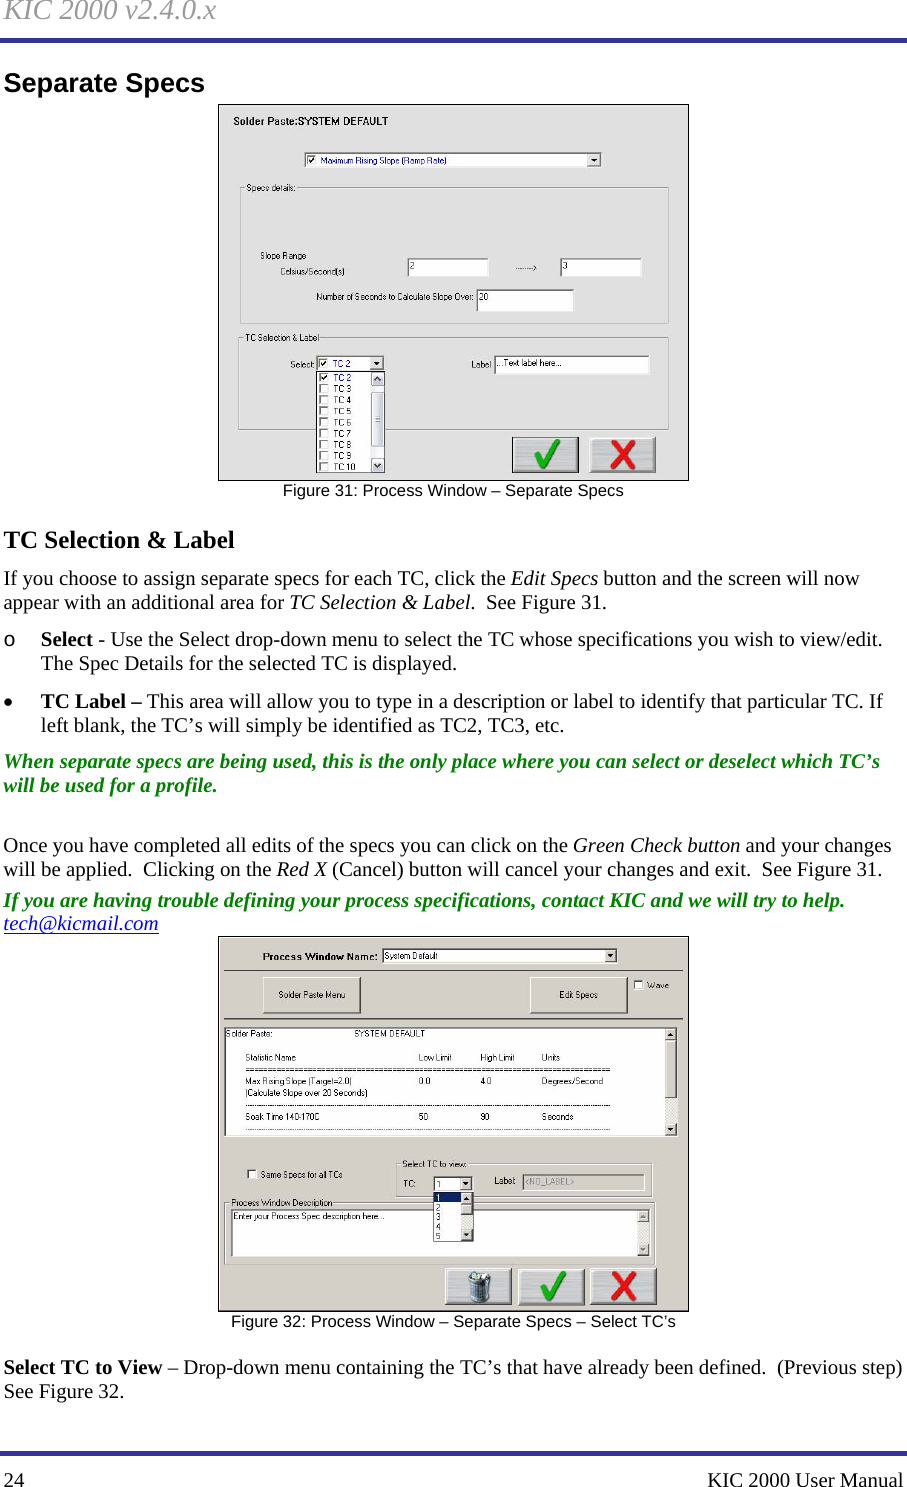 KIC 2000 v2.4.0.x 24    KIC 2000 User Manual Separate Specs  Figure 31: Process Window – Separate Specs TC Selection &amp; Label If you choose to assign separate specs for each TC, click the Edit Specs button and the screen will now appear with an additional area for TC Selection &amp; Label.  See Figure 31.   o Select - Use the Select drop-down menu to select the TC whose specifications you wish to view/edit.  The Spec Details for the selected TC is displayed. • TC Label – This area will allow you to type in a description or label to identify that particular TC. If left blank, the TC’s will simply be identified as TC2, TC3, etc. When separate specs are being used, this is the only place where you can select or deselect which TC’s will be used for a profile.  Once you have completed all edits of the specs you can click on the Green Check button and your changes will be applied.  Clicking on the Red X (Cancel) button will cancel your changes and exit.  See Figure 31.   If you are having trouble defining your process specifications, contact KIC and we will try to help.  tech@kicmail.com  Figure 32: Process Window – Separate Specs – Select TC’s  Select TC to View – Drop-down menu containing the TC’s that have already been defined.  (Previous step)  See Figure 32.   